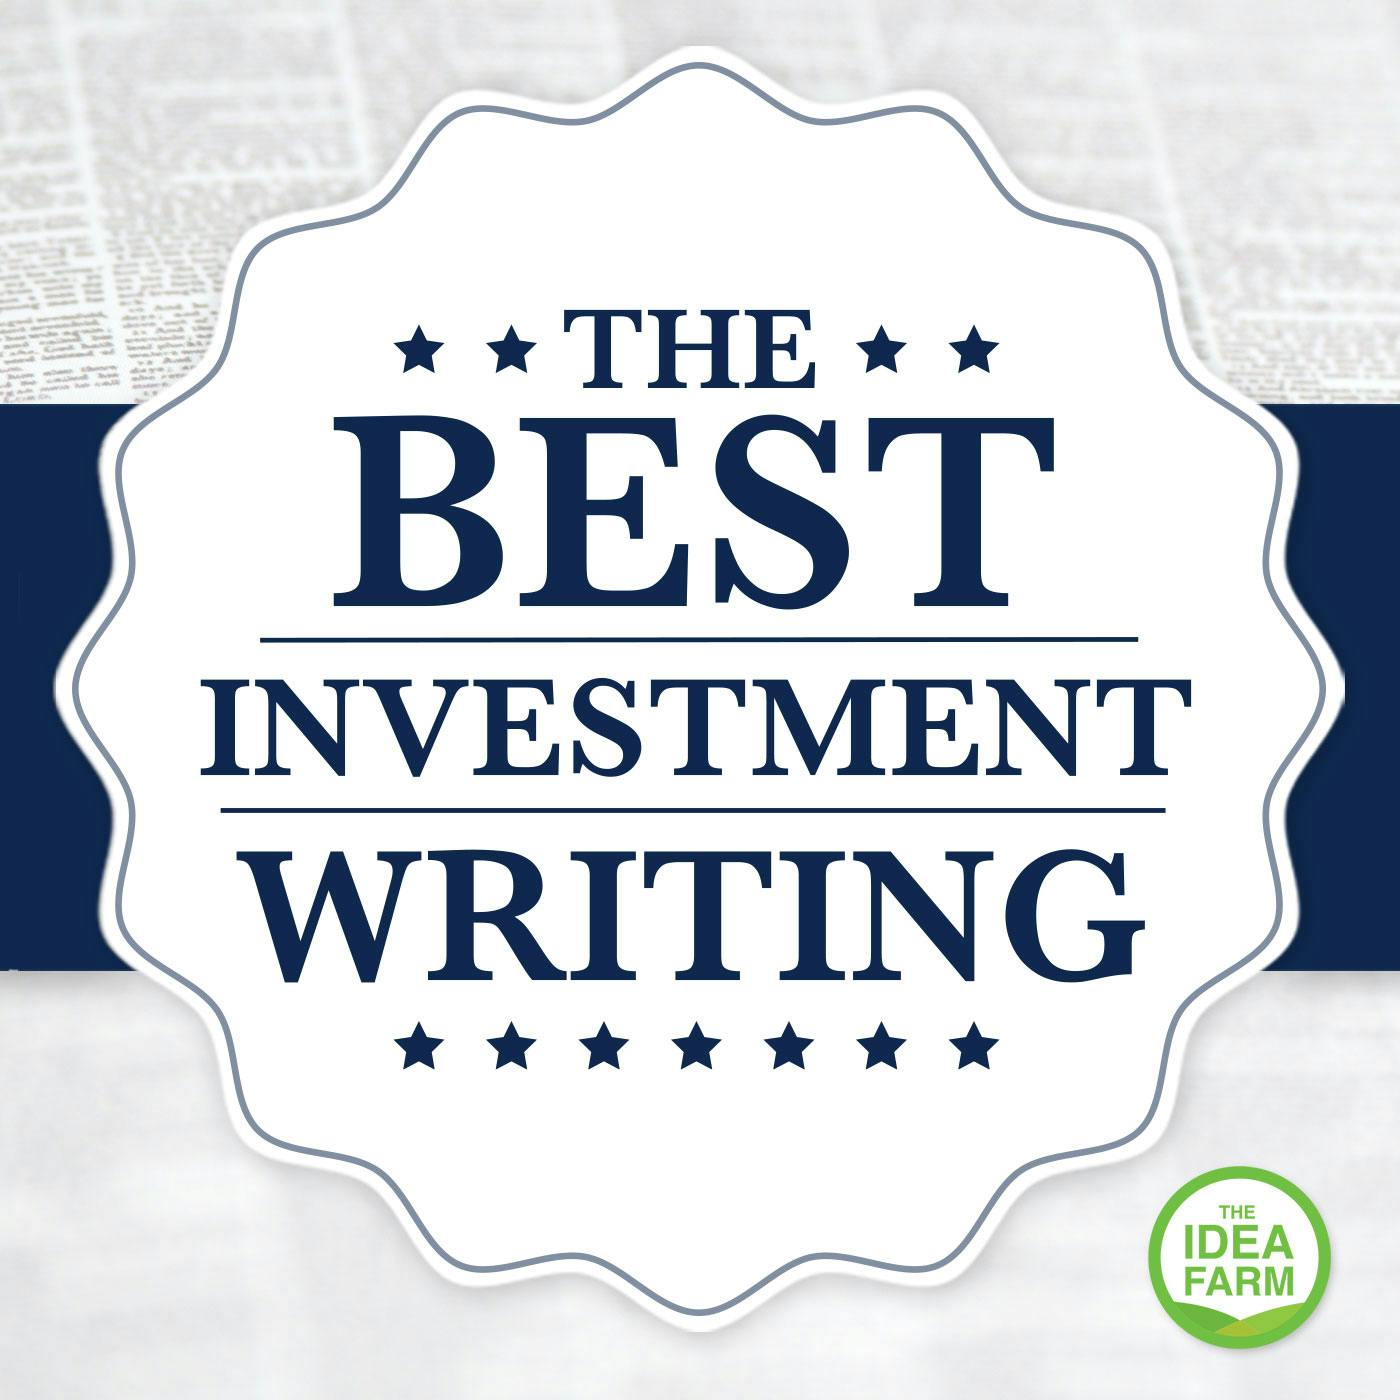 The Best Investment Writing Volume 4: Vineer Bhansali, LongTail Alpha  – Trading Sardines: The Case Of Currency Hedged Negative Yielding Bonds